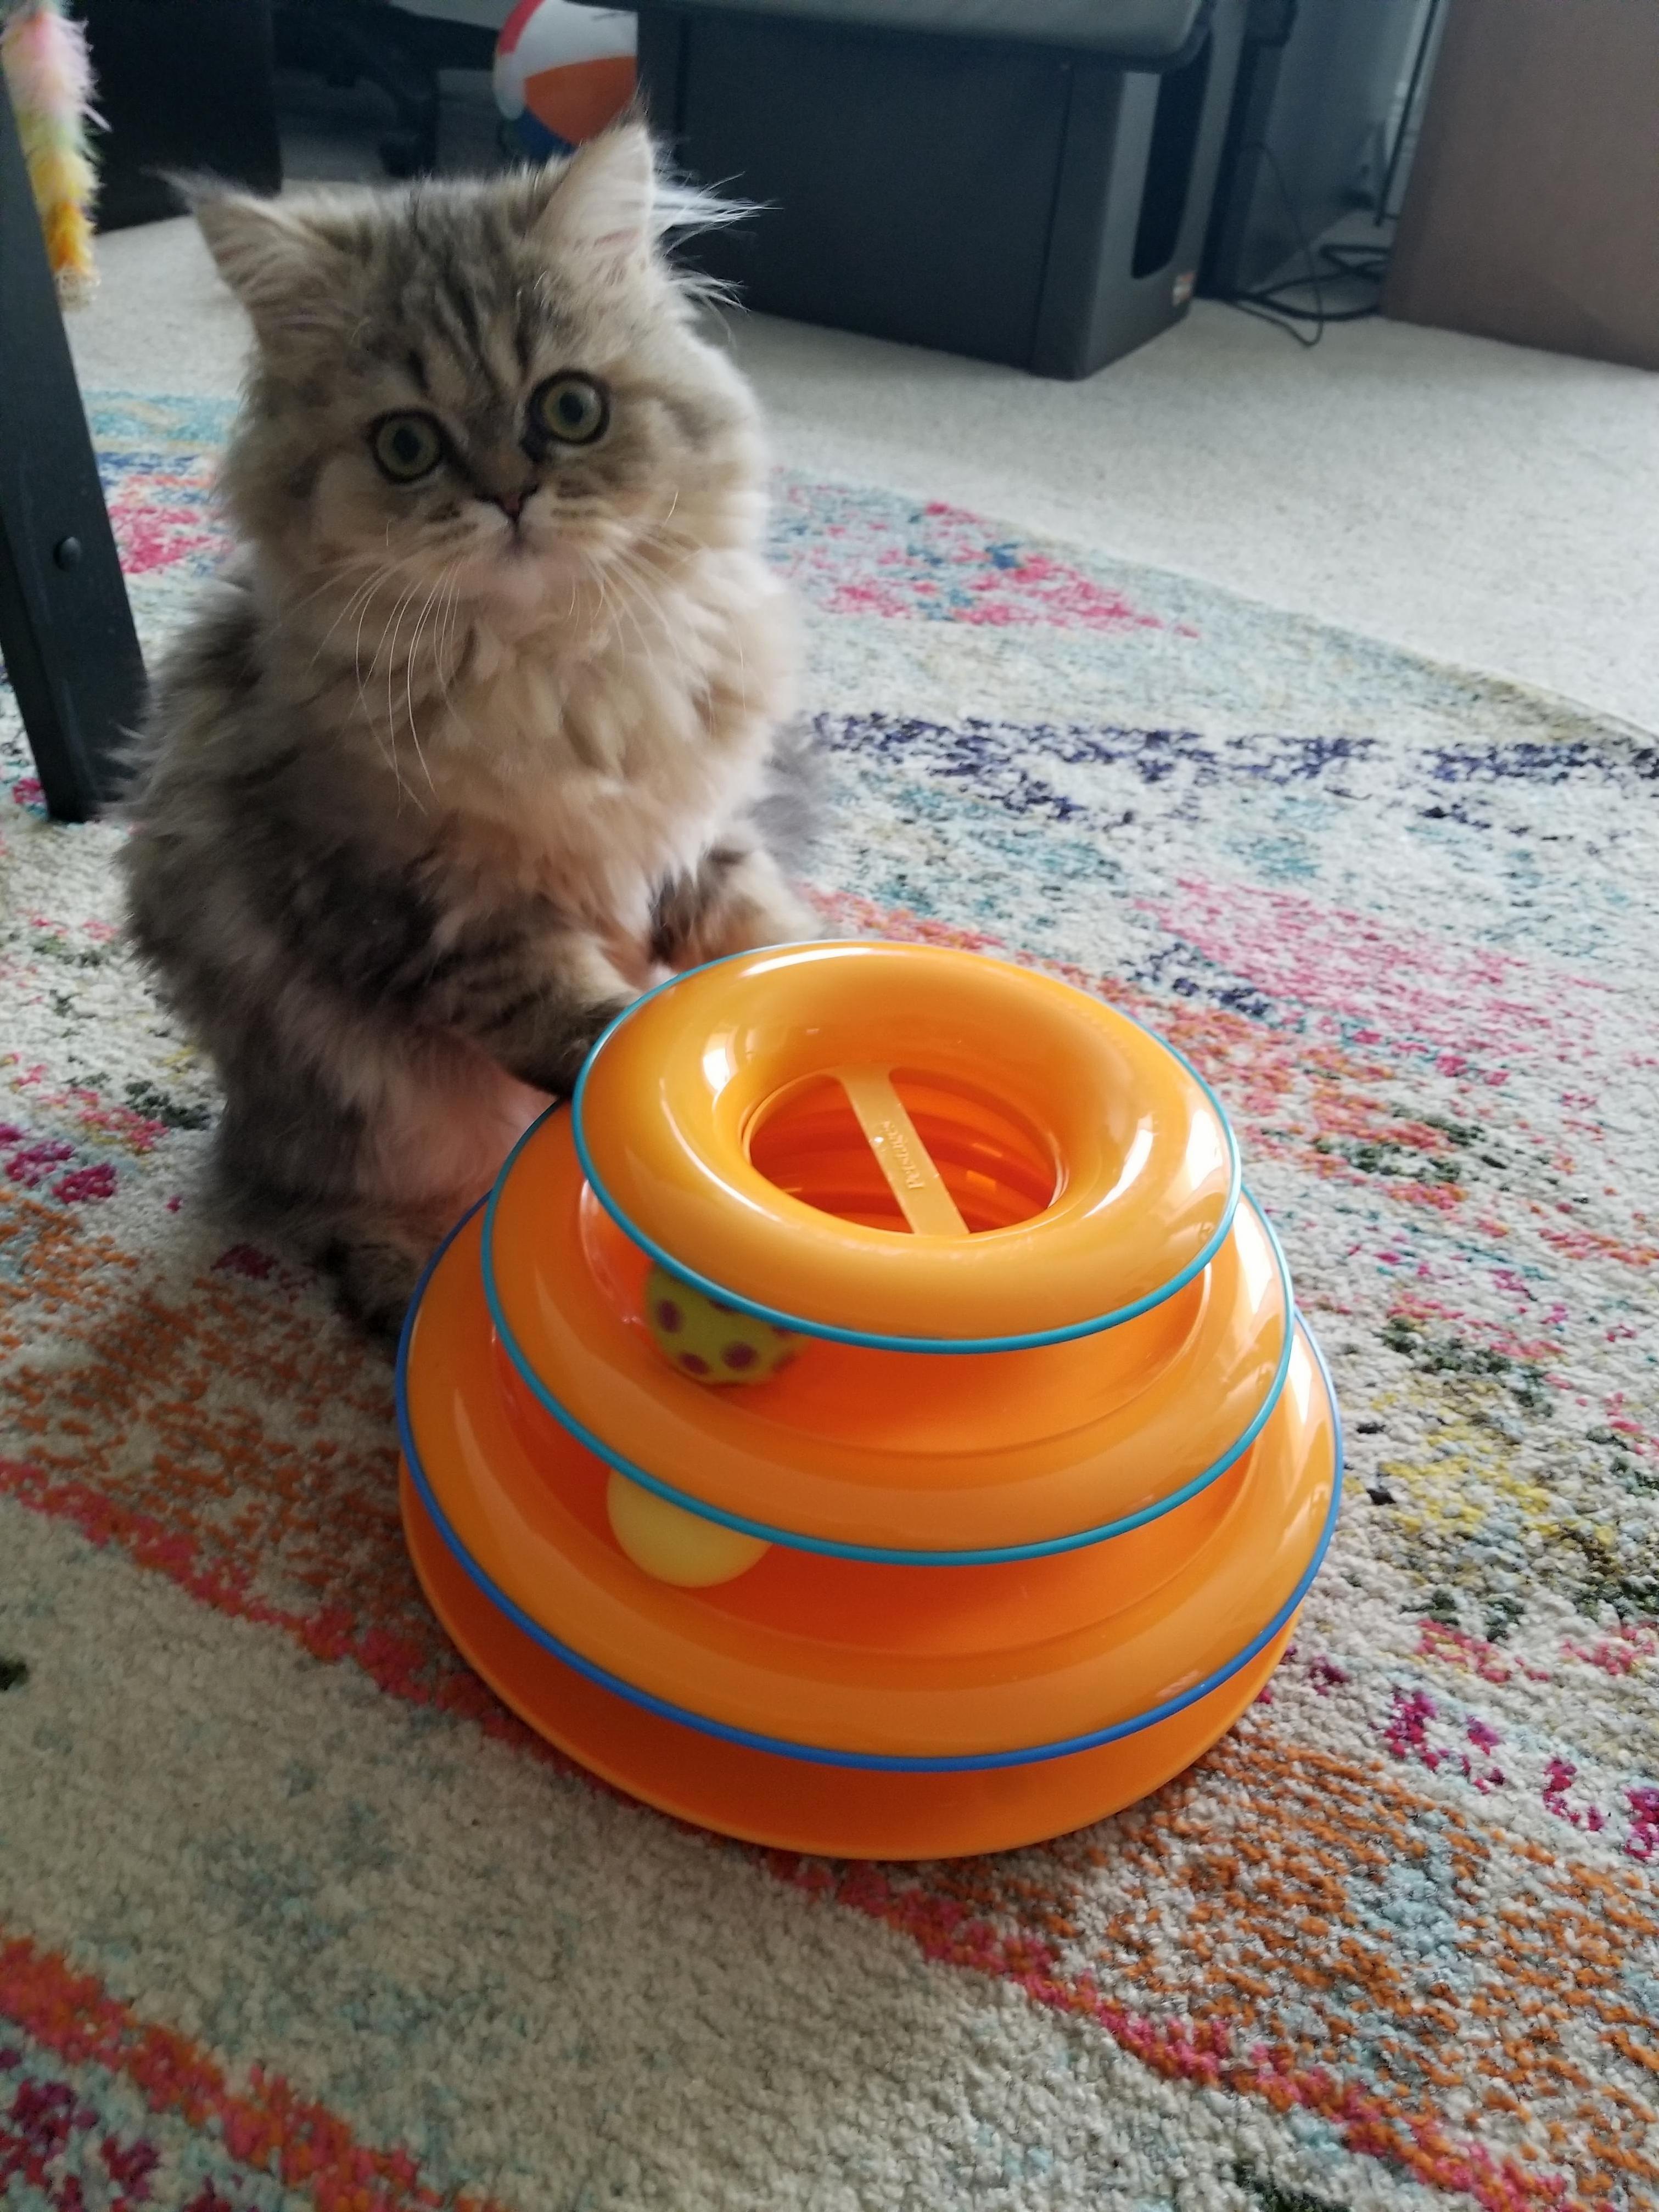 Proud of her new toy